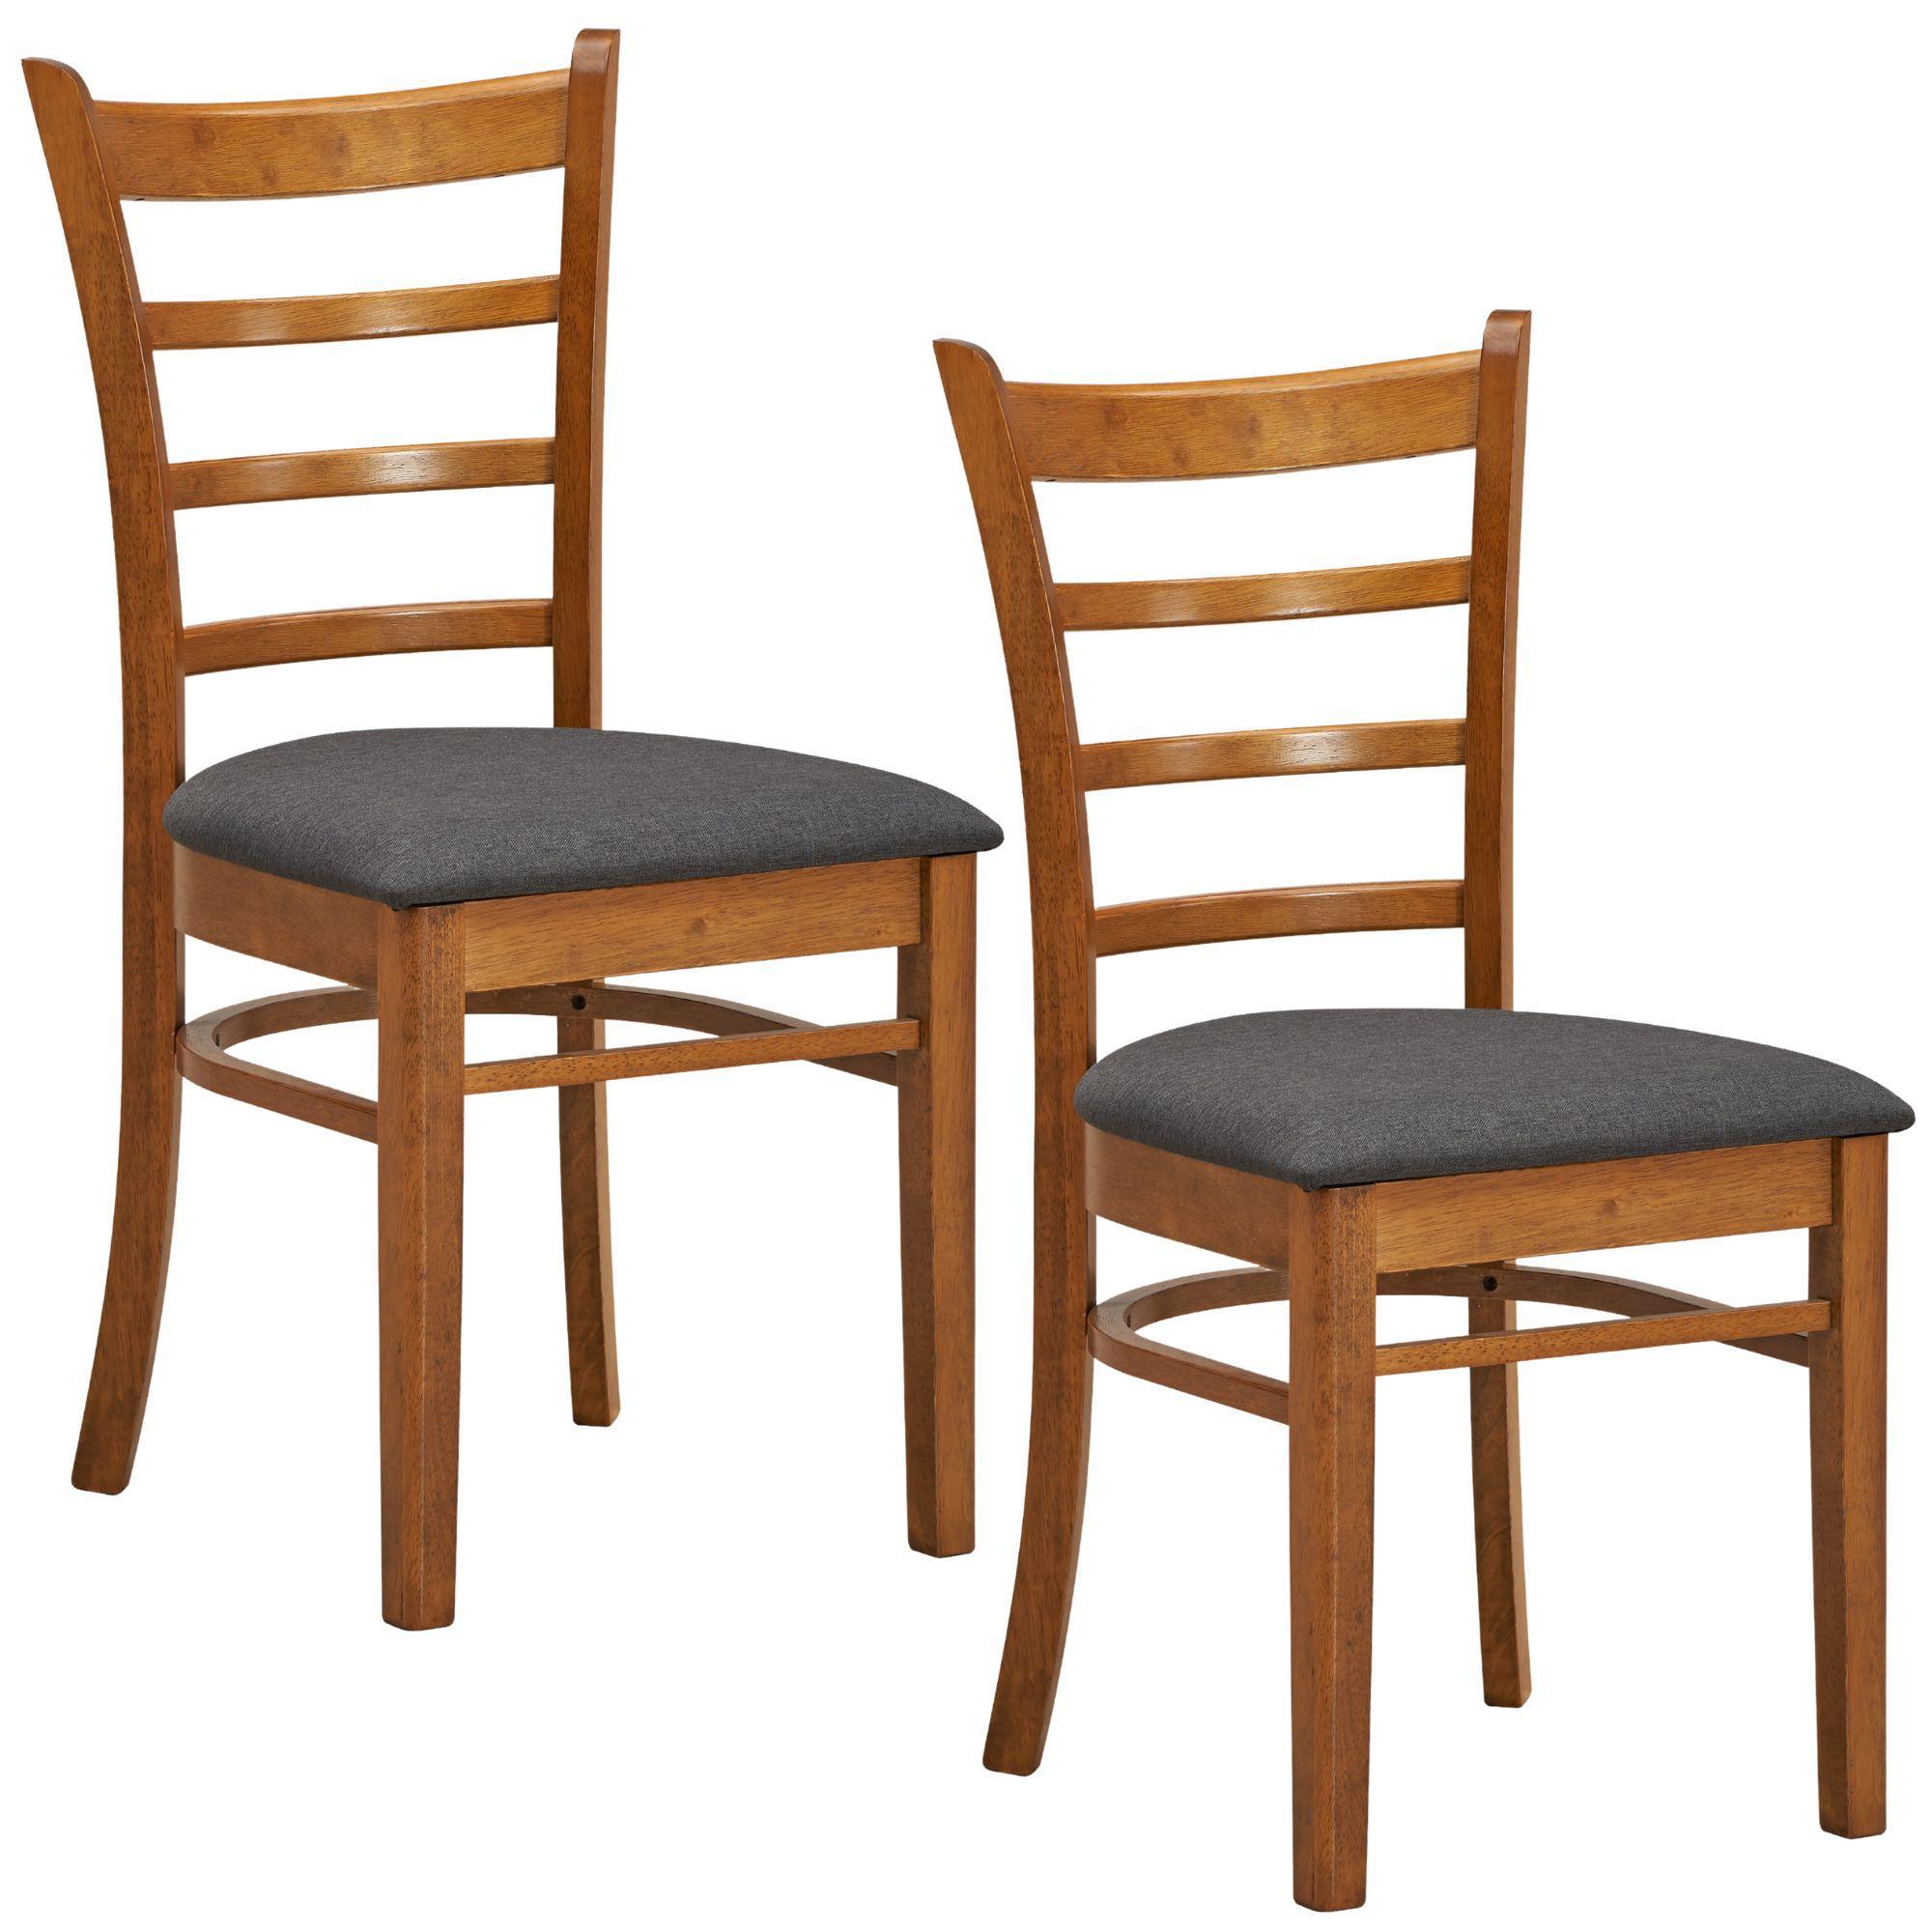 【Sale】Linaria Dining Chair Set of 2 Crossback Solid Rubber Wood Fabric Seat - Walnut